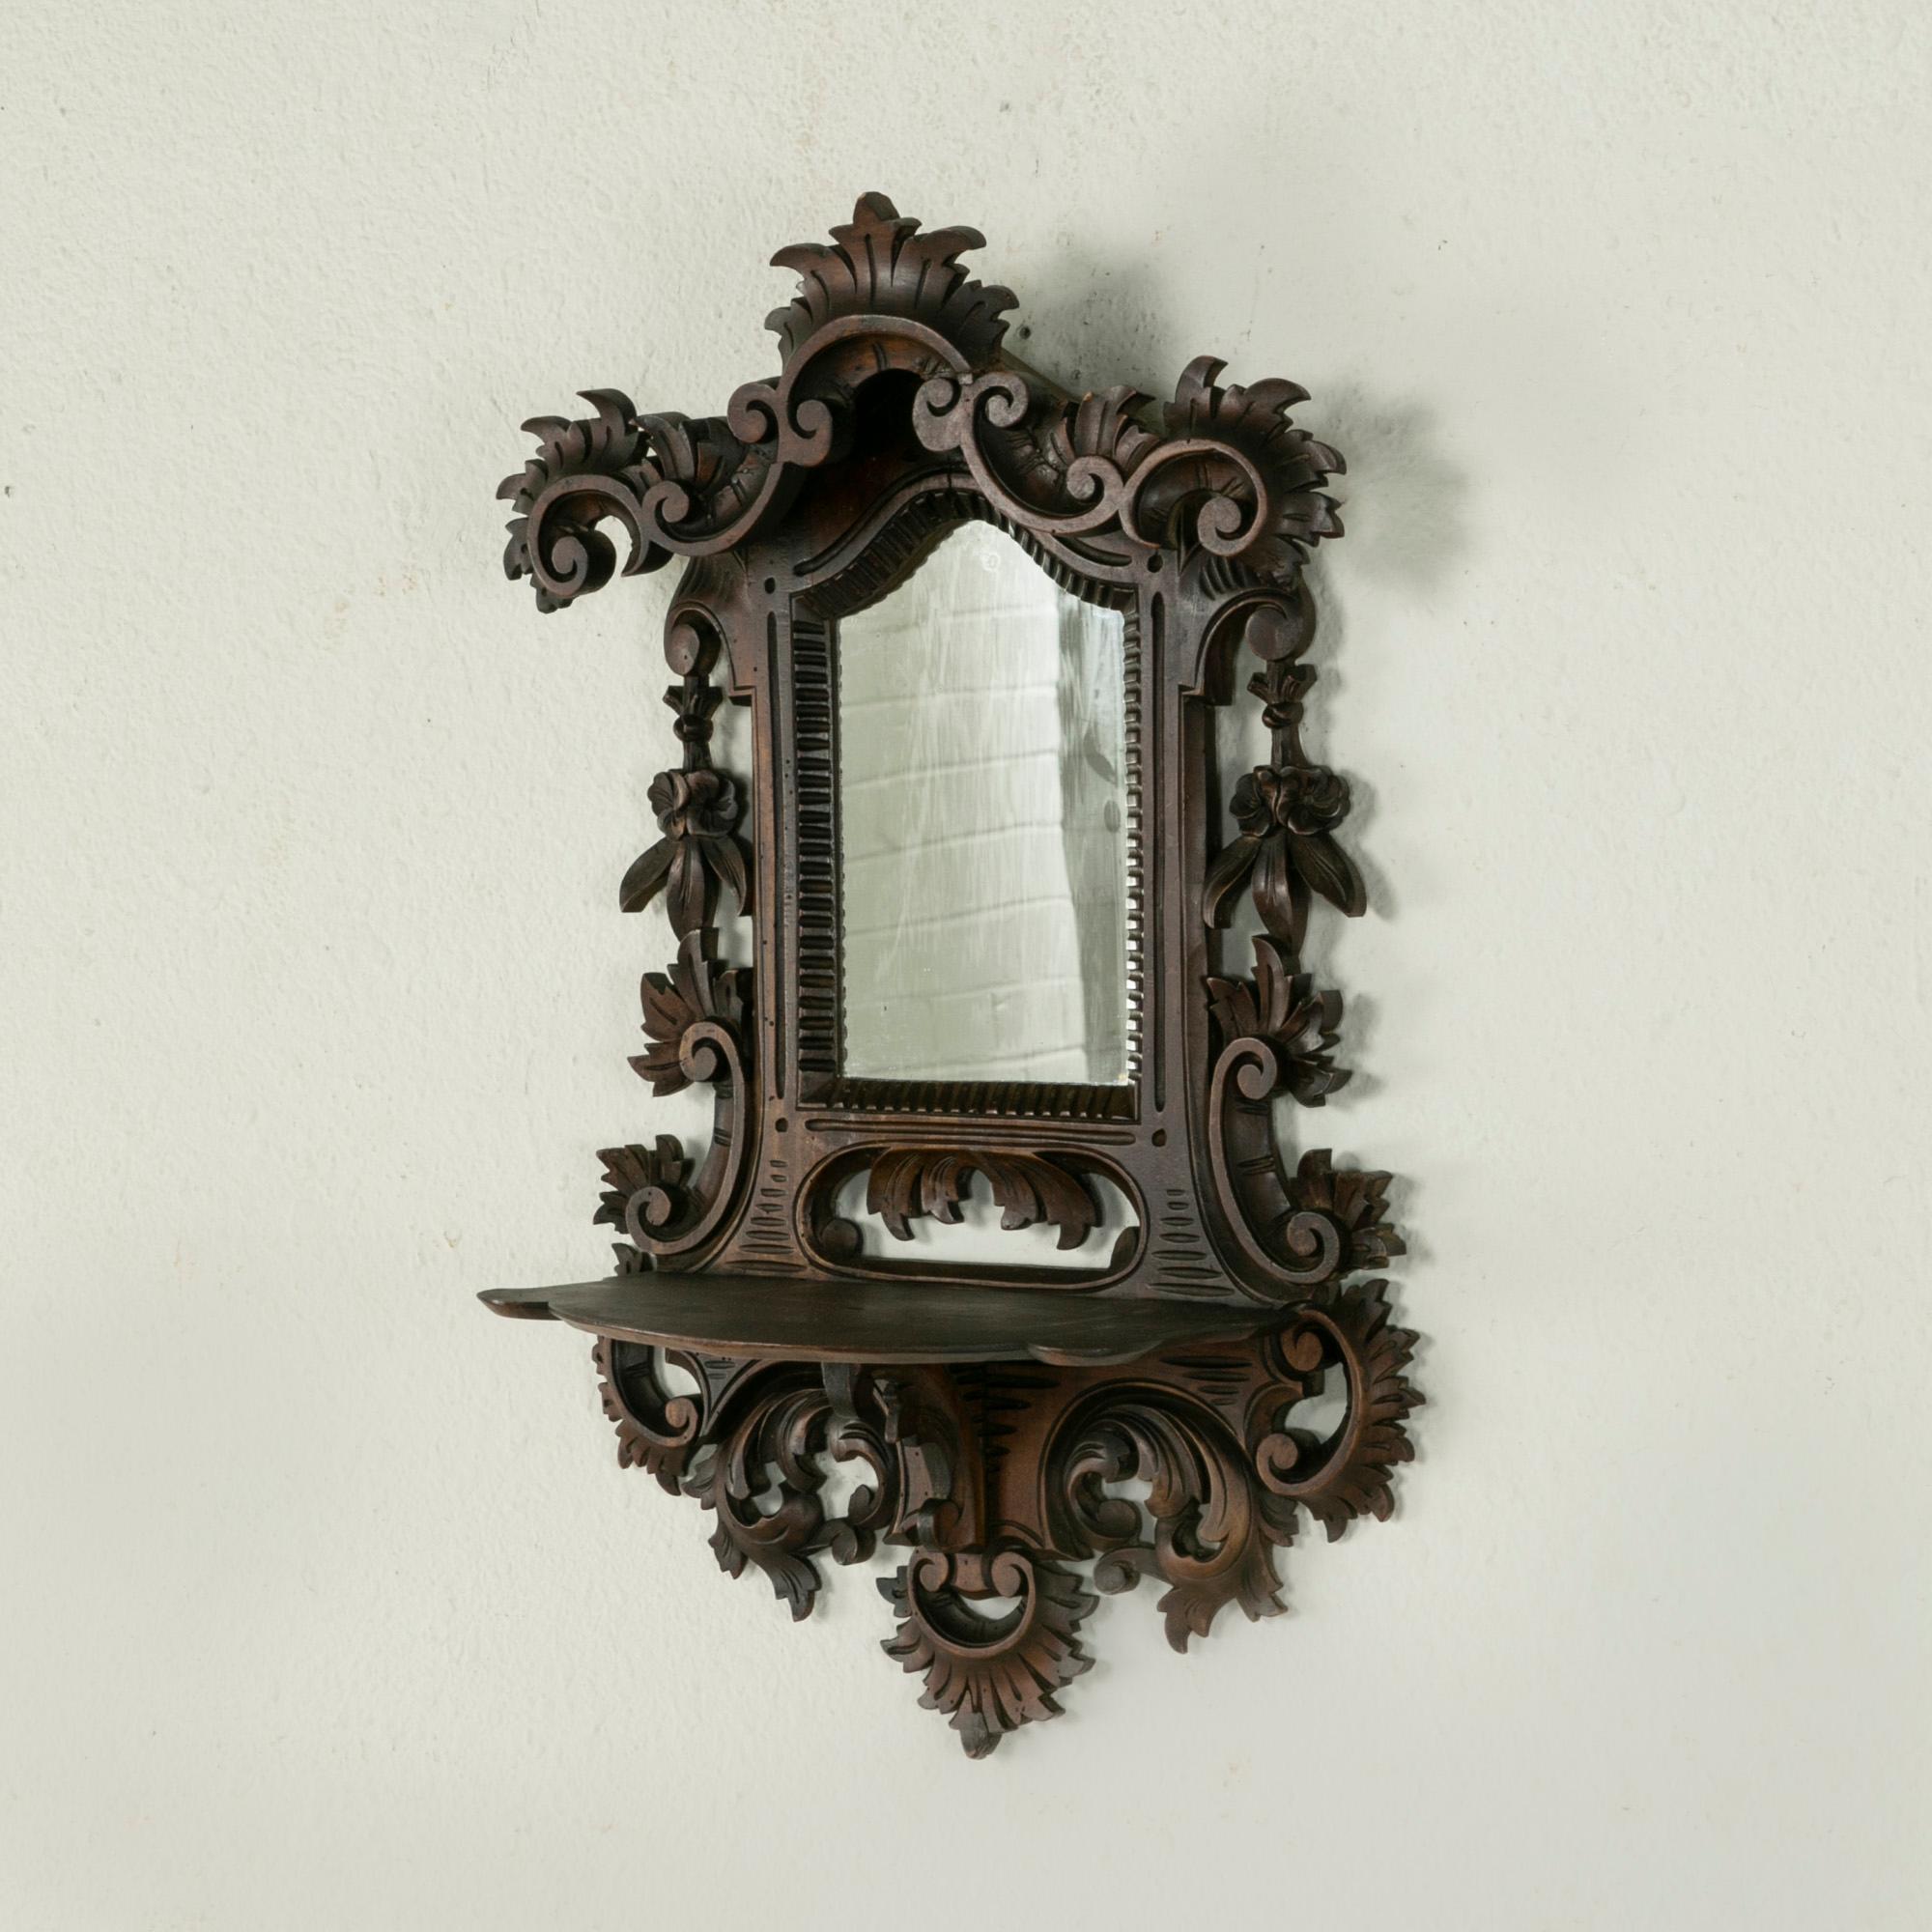 This late nineteenth century French wall mirror with shelf is from the Black Forest region in eastern France. Constructed of hand carved walnut, this piece features a scrolling leaves and floral motif. A shelf below the mirror allows for an object